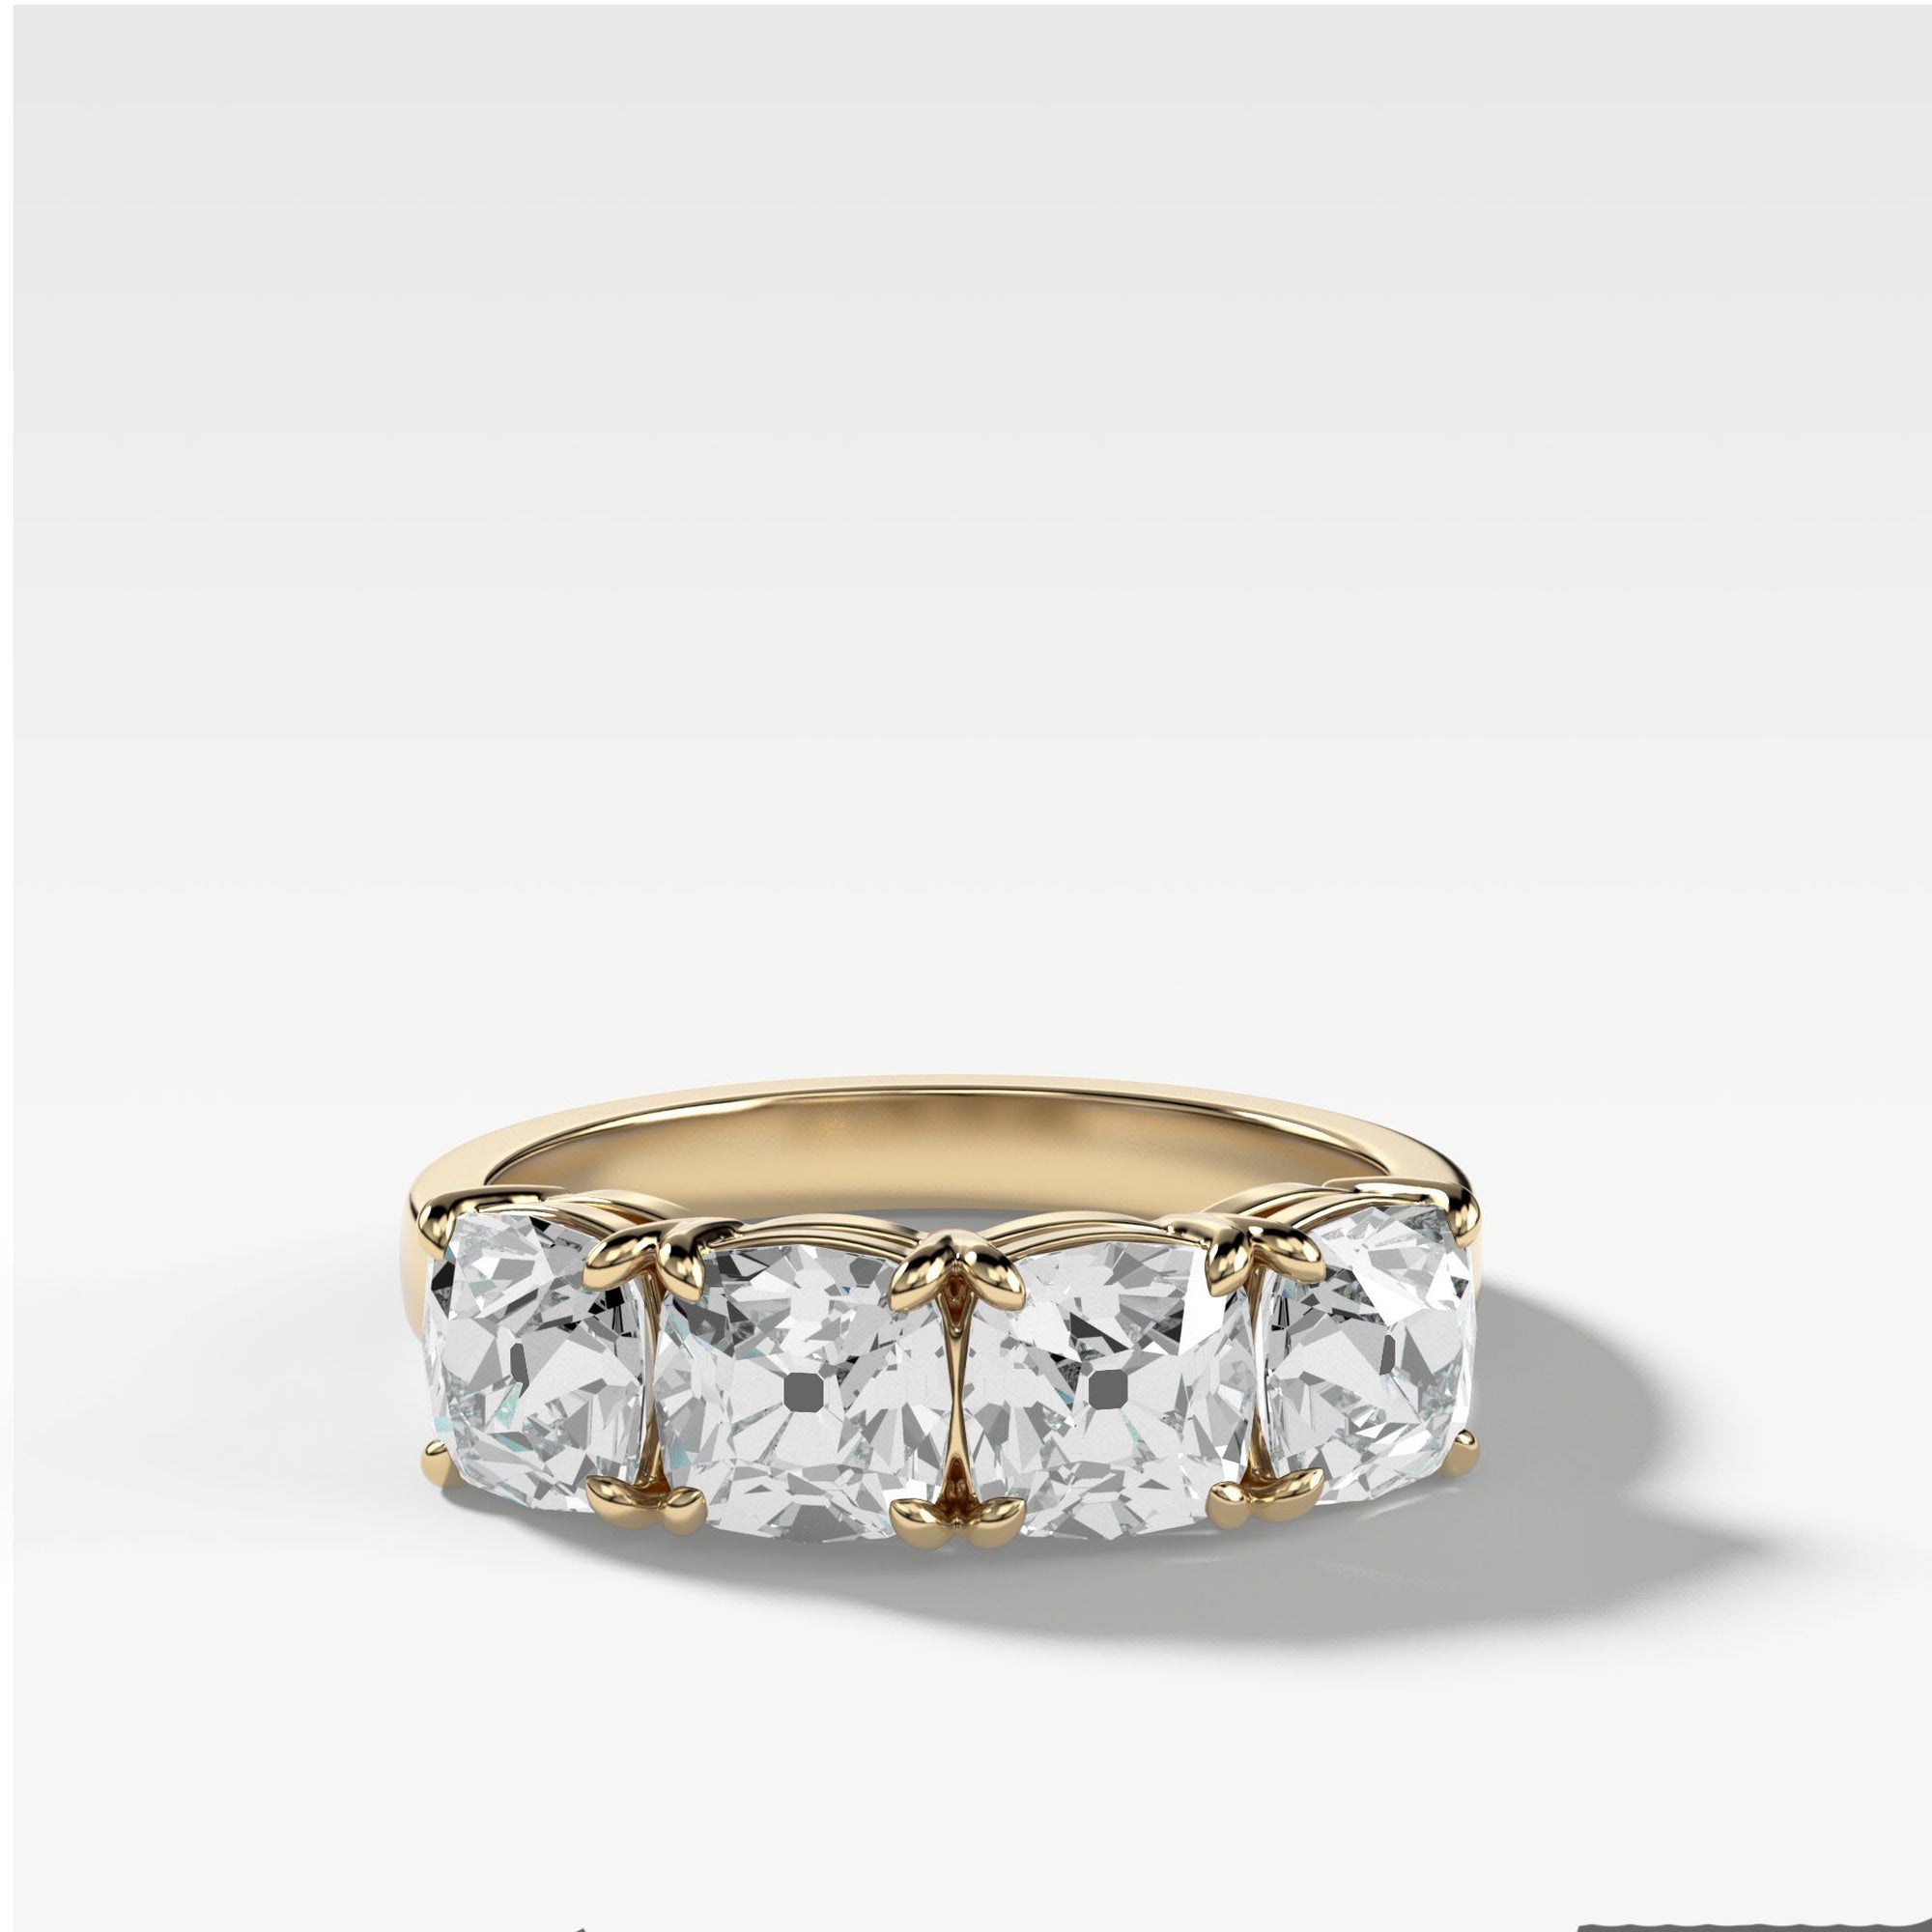 Four Stone Diamond Wedding Band With Old Mine Cuts by Good Stone in Yellow Gold